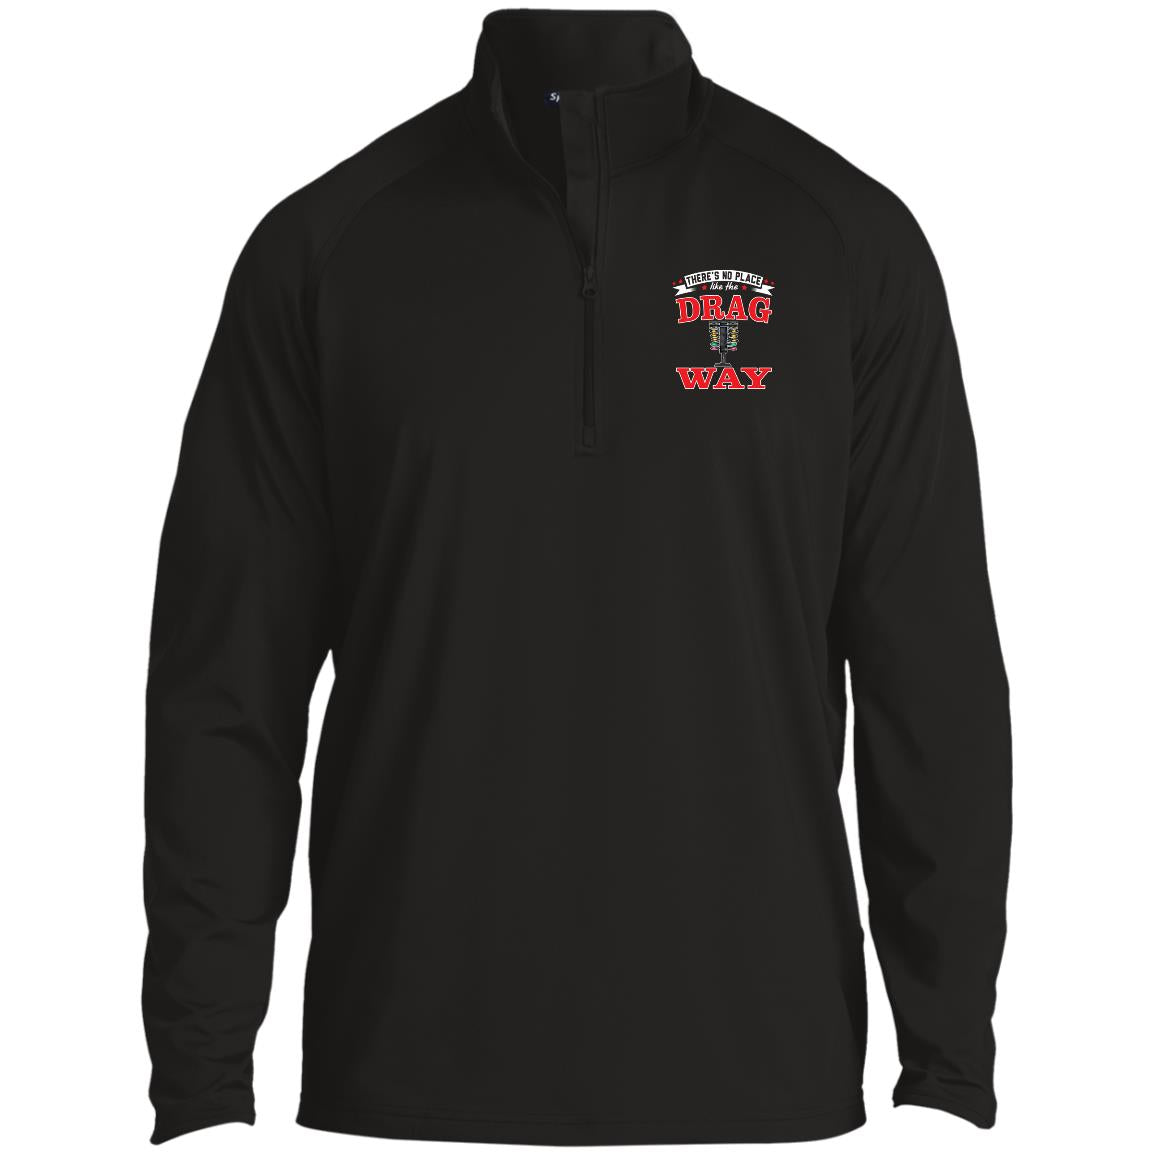 There's No Place Like The Dragway 1/2 Zip Raglan Performance Pullover